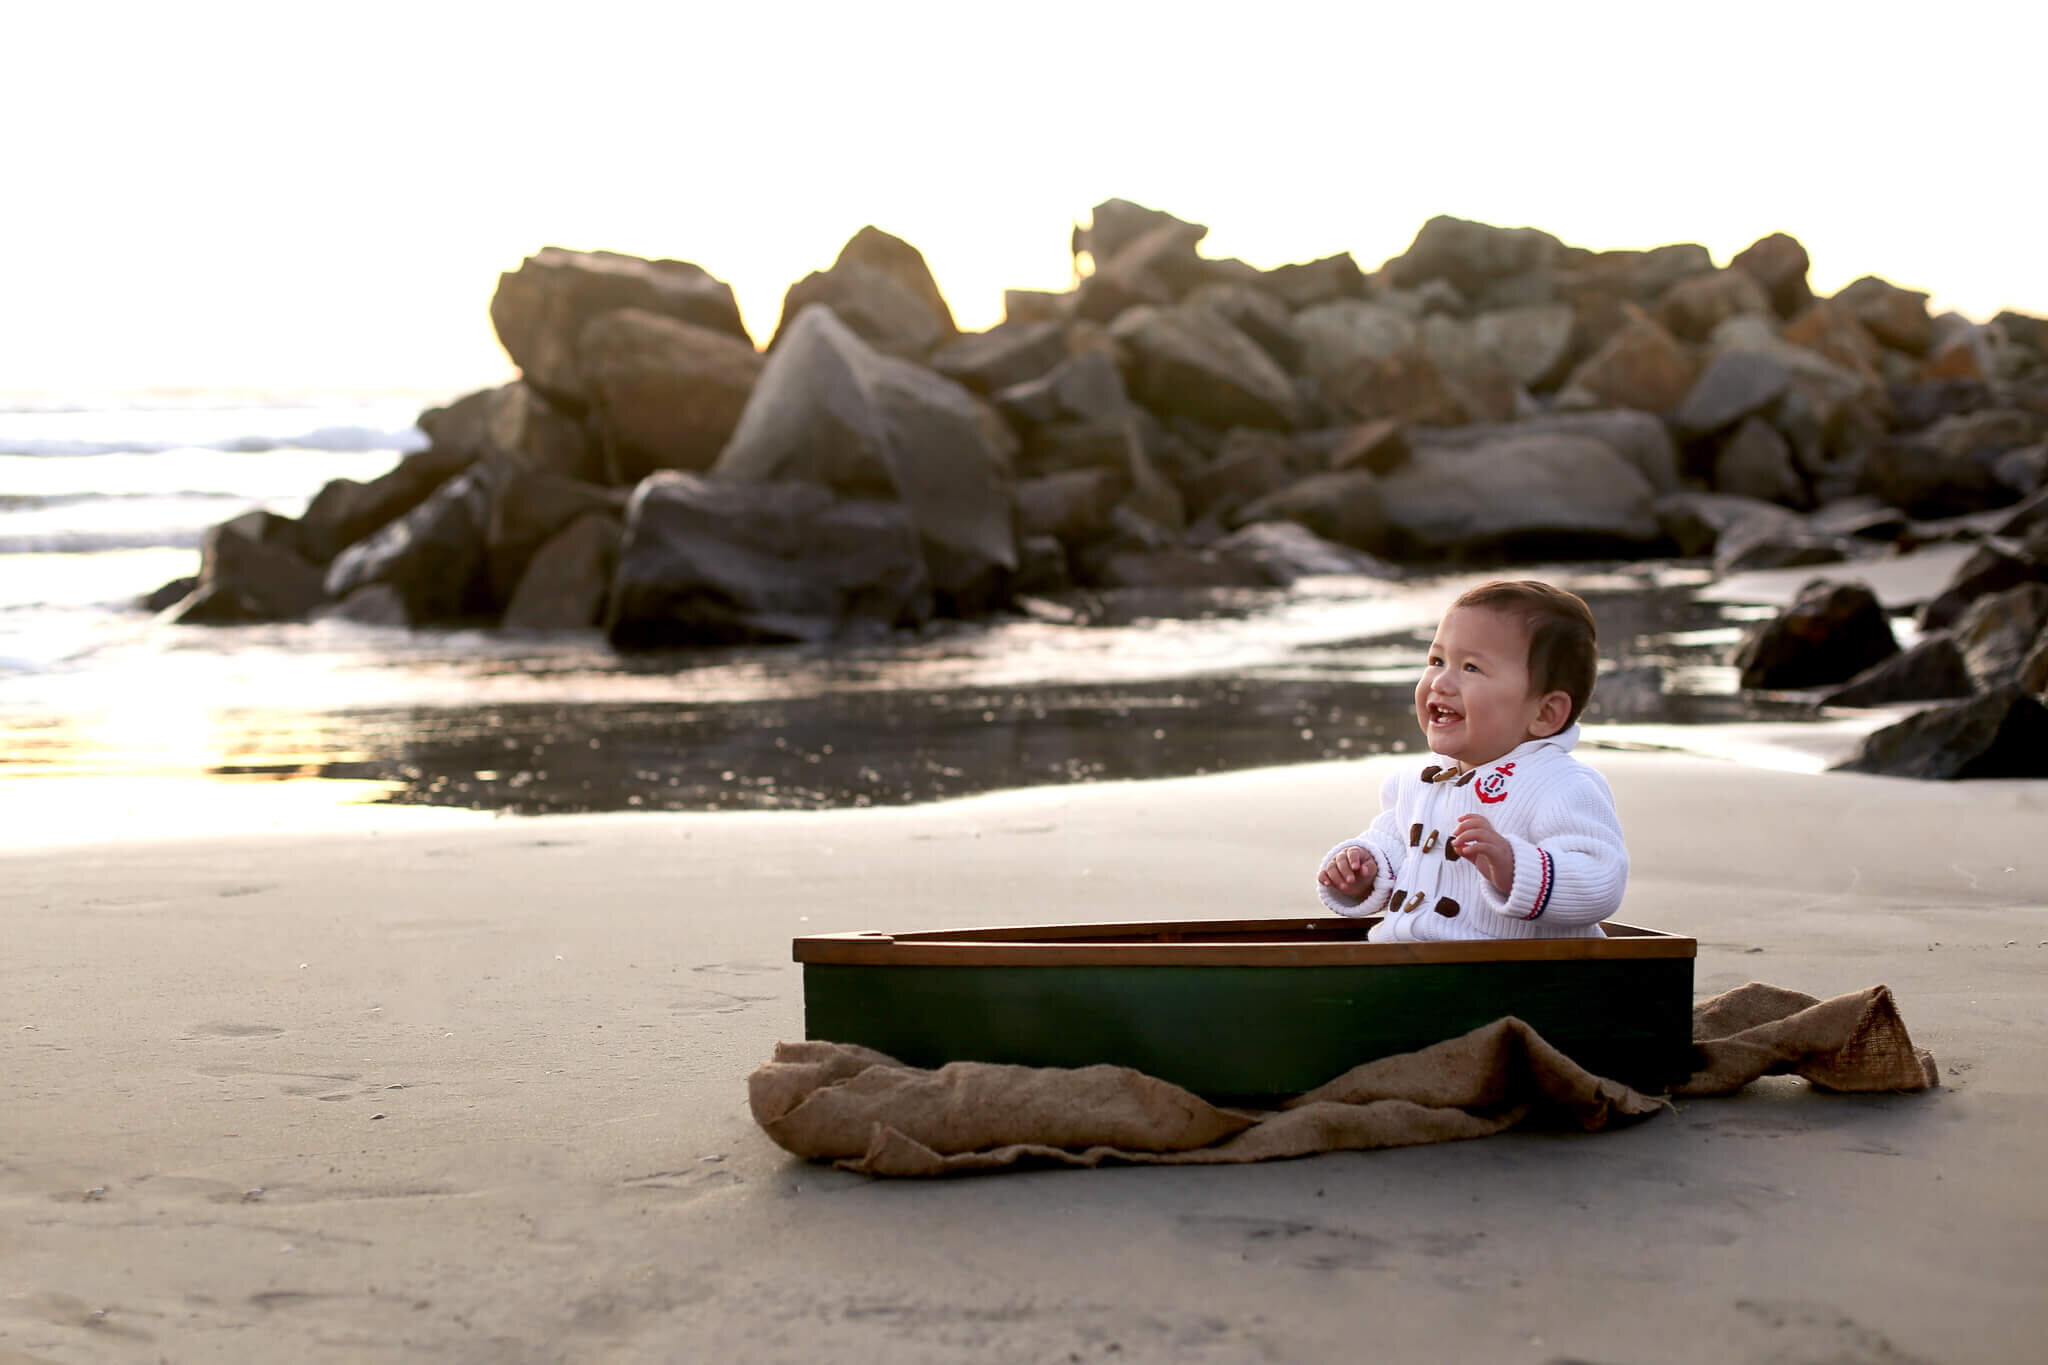  An image of a happy baby boy in a sporty sweater, sitting playfully in a tiny boat resting on the seashore near some rocks, marking his milestone from a baby milestone photo session 